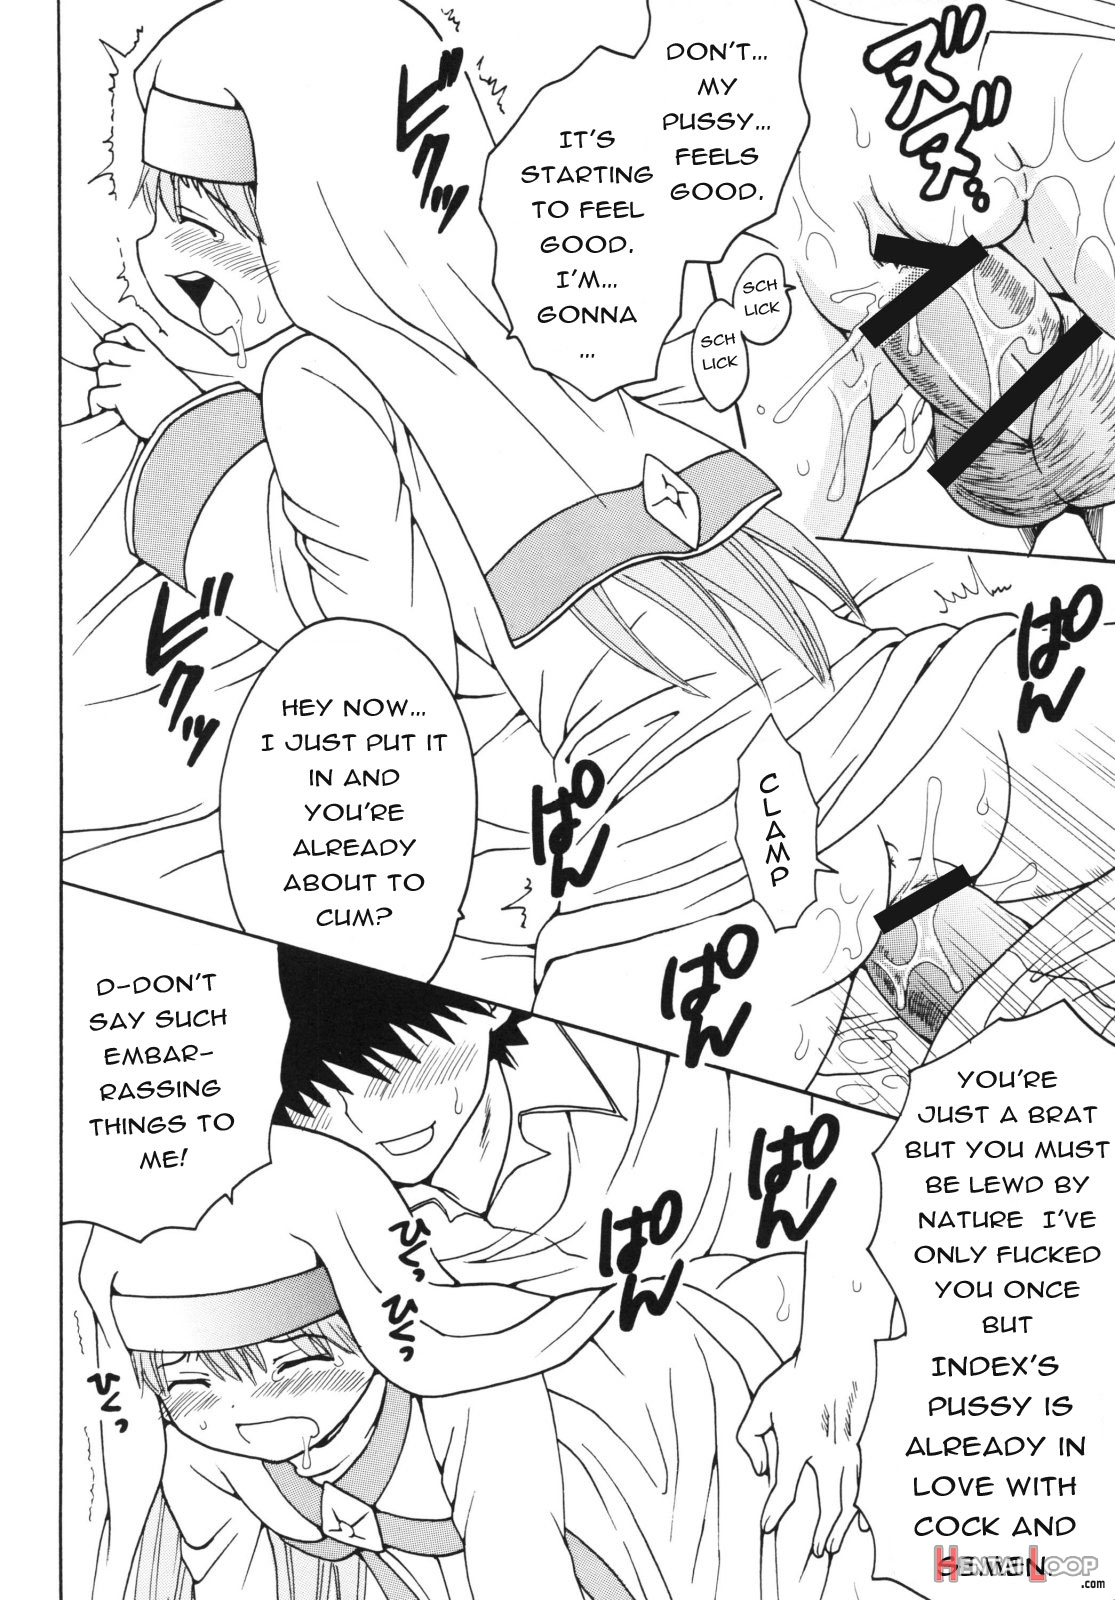 A Certain Magical Lewd Index #2 page 44